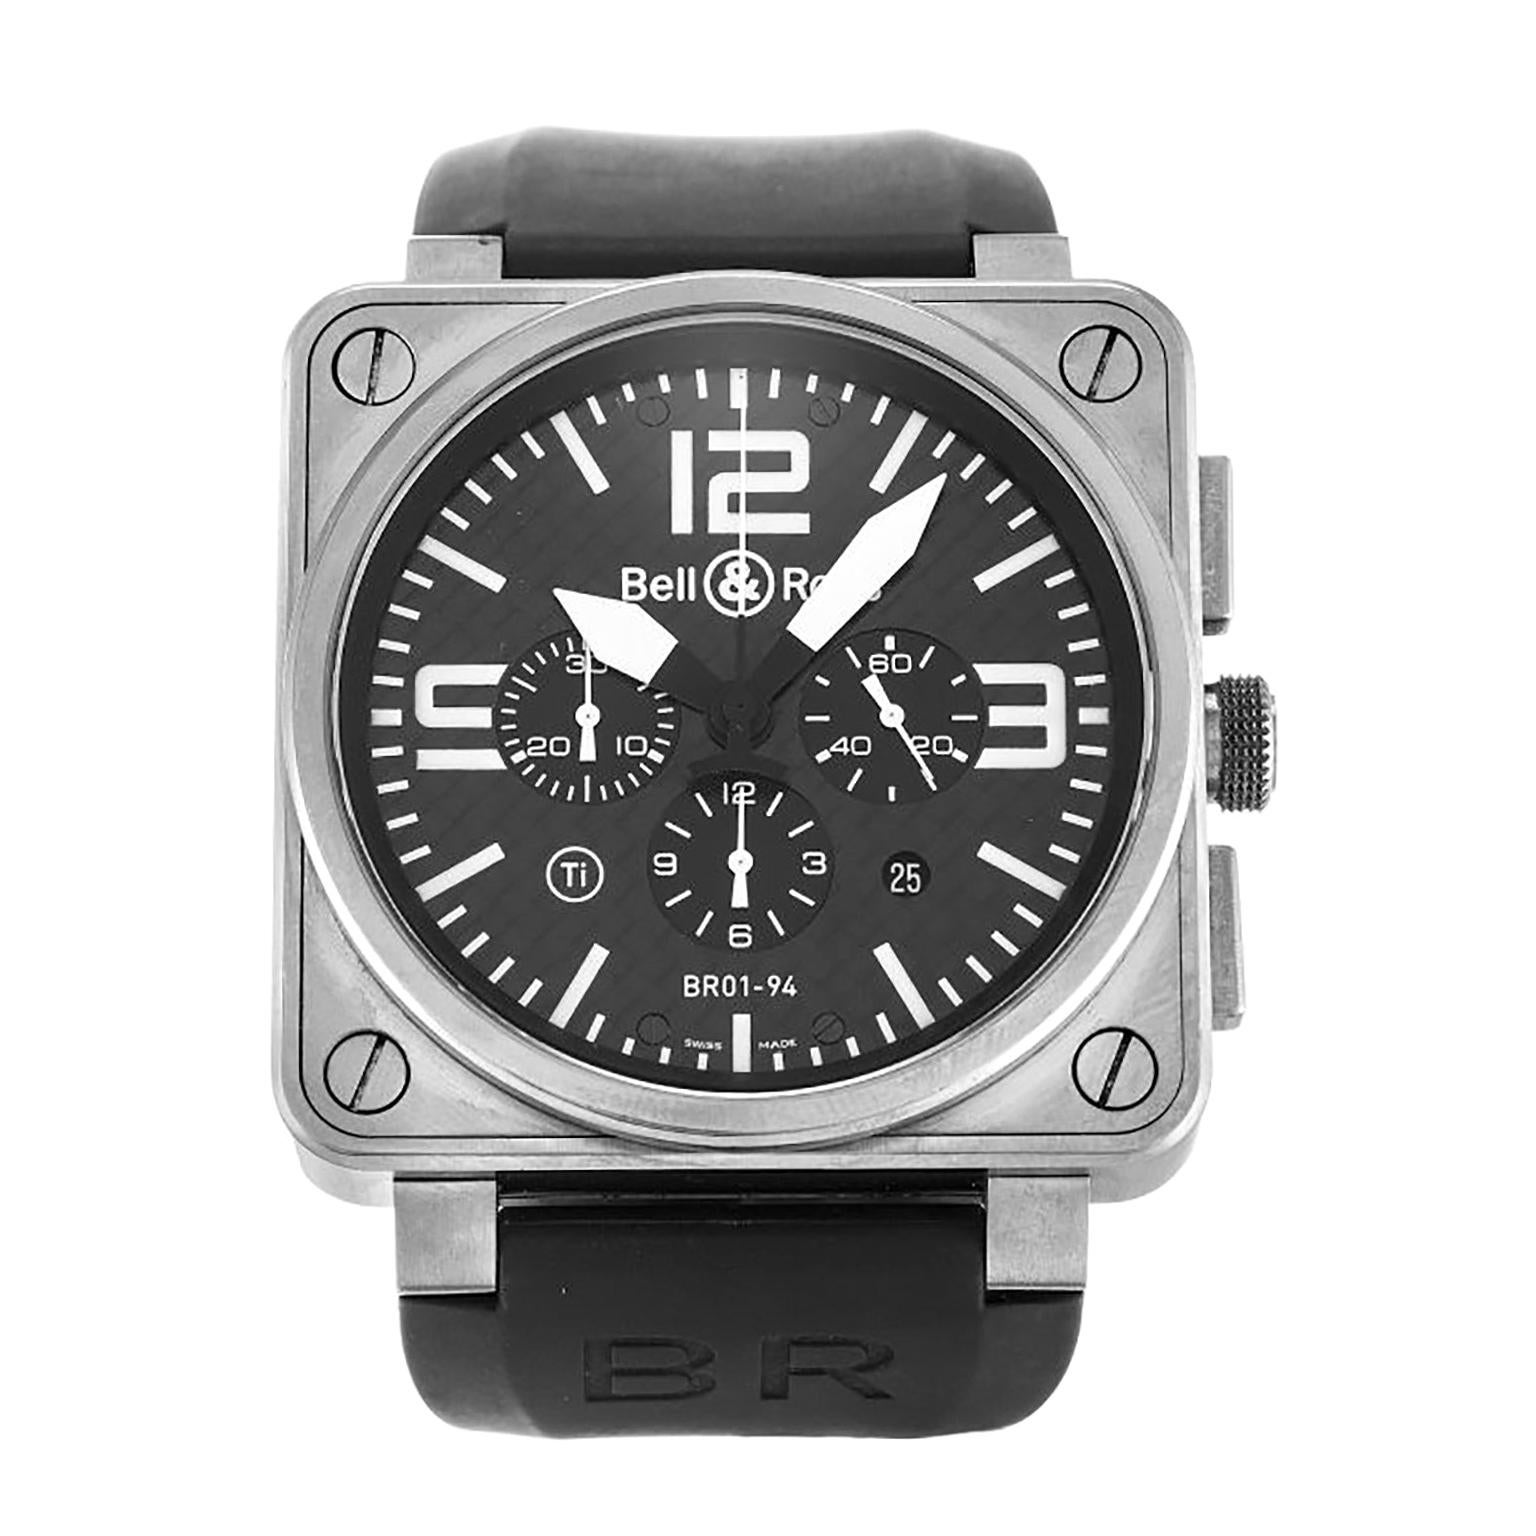 Bell & Ross BR01-94 Titanium and Stainless Steel Watch